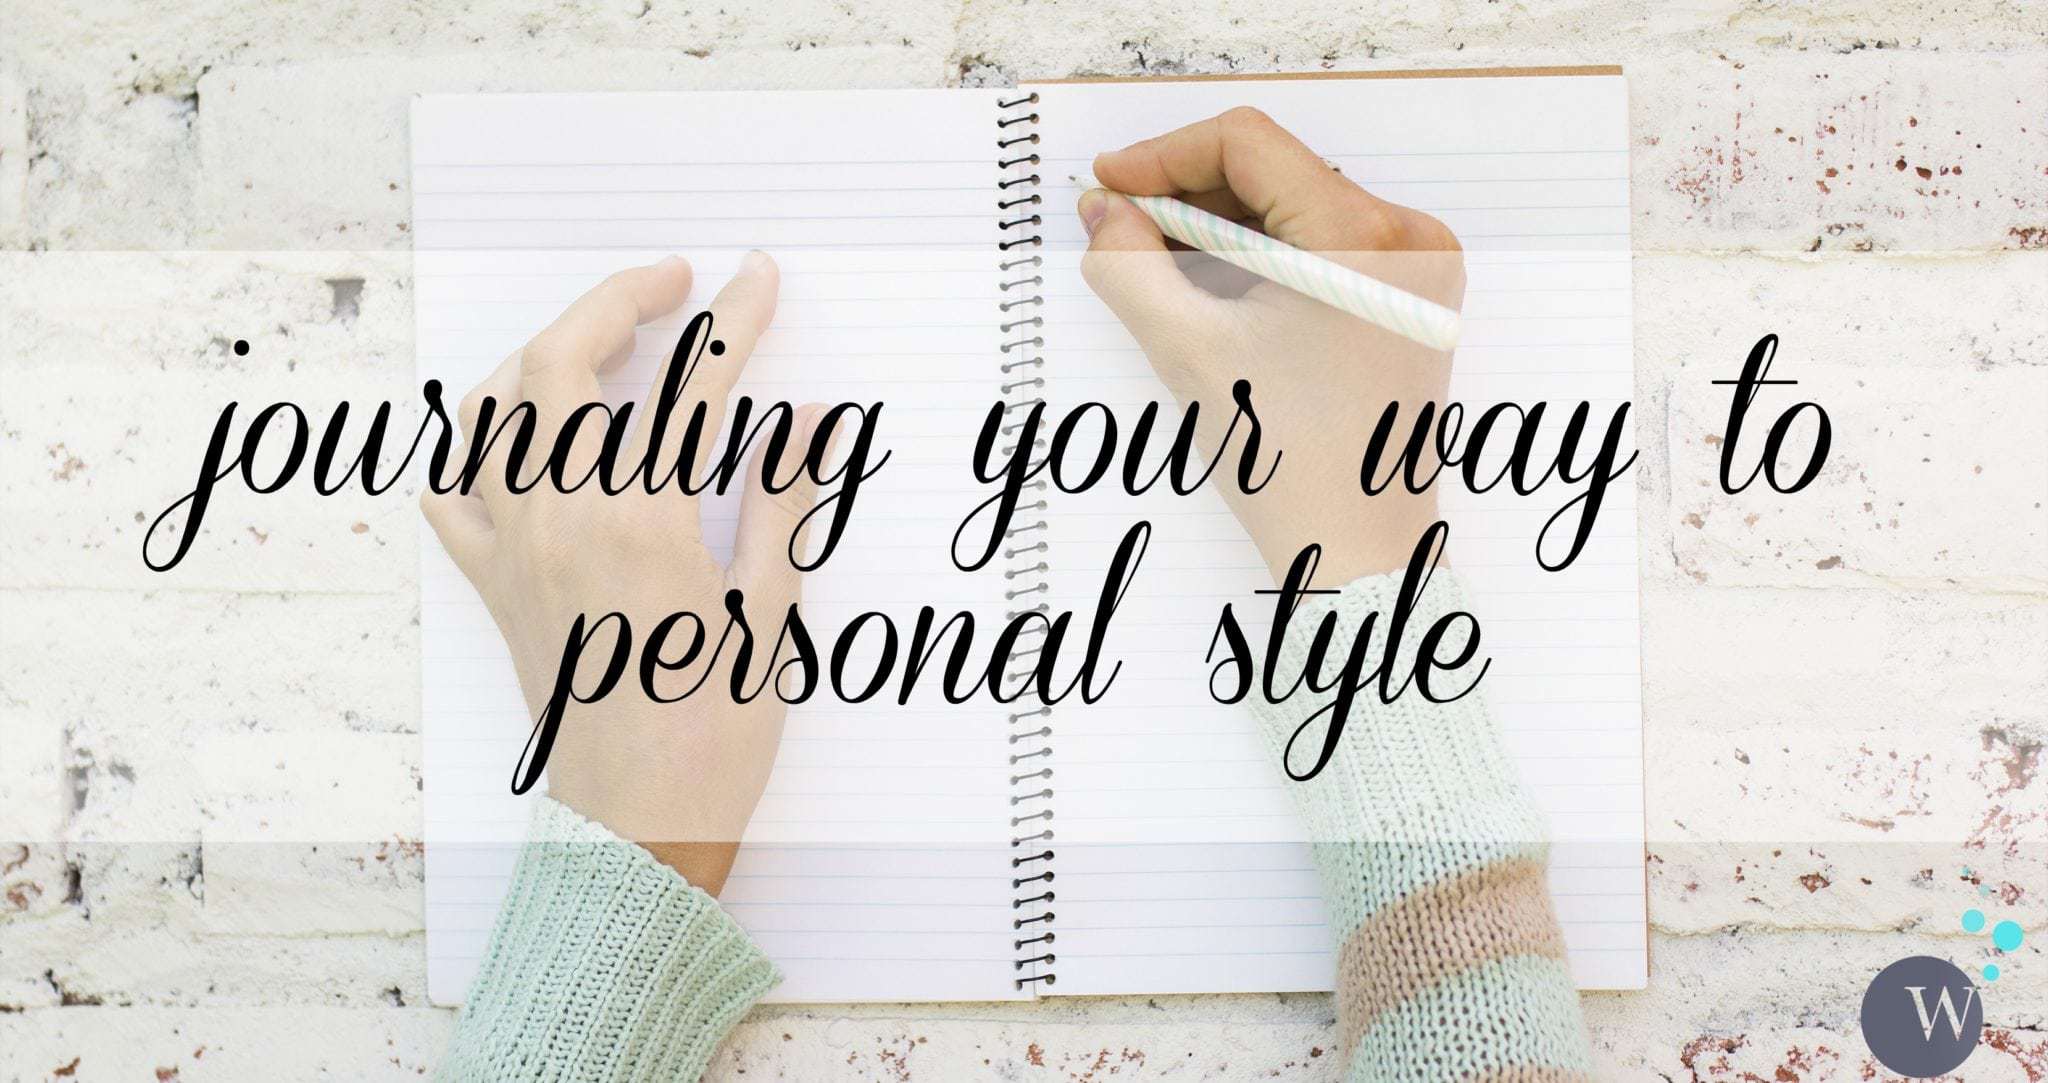 Wardrobe Oxygen: Journaling your way to personal style